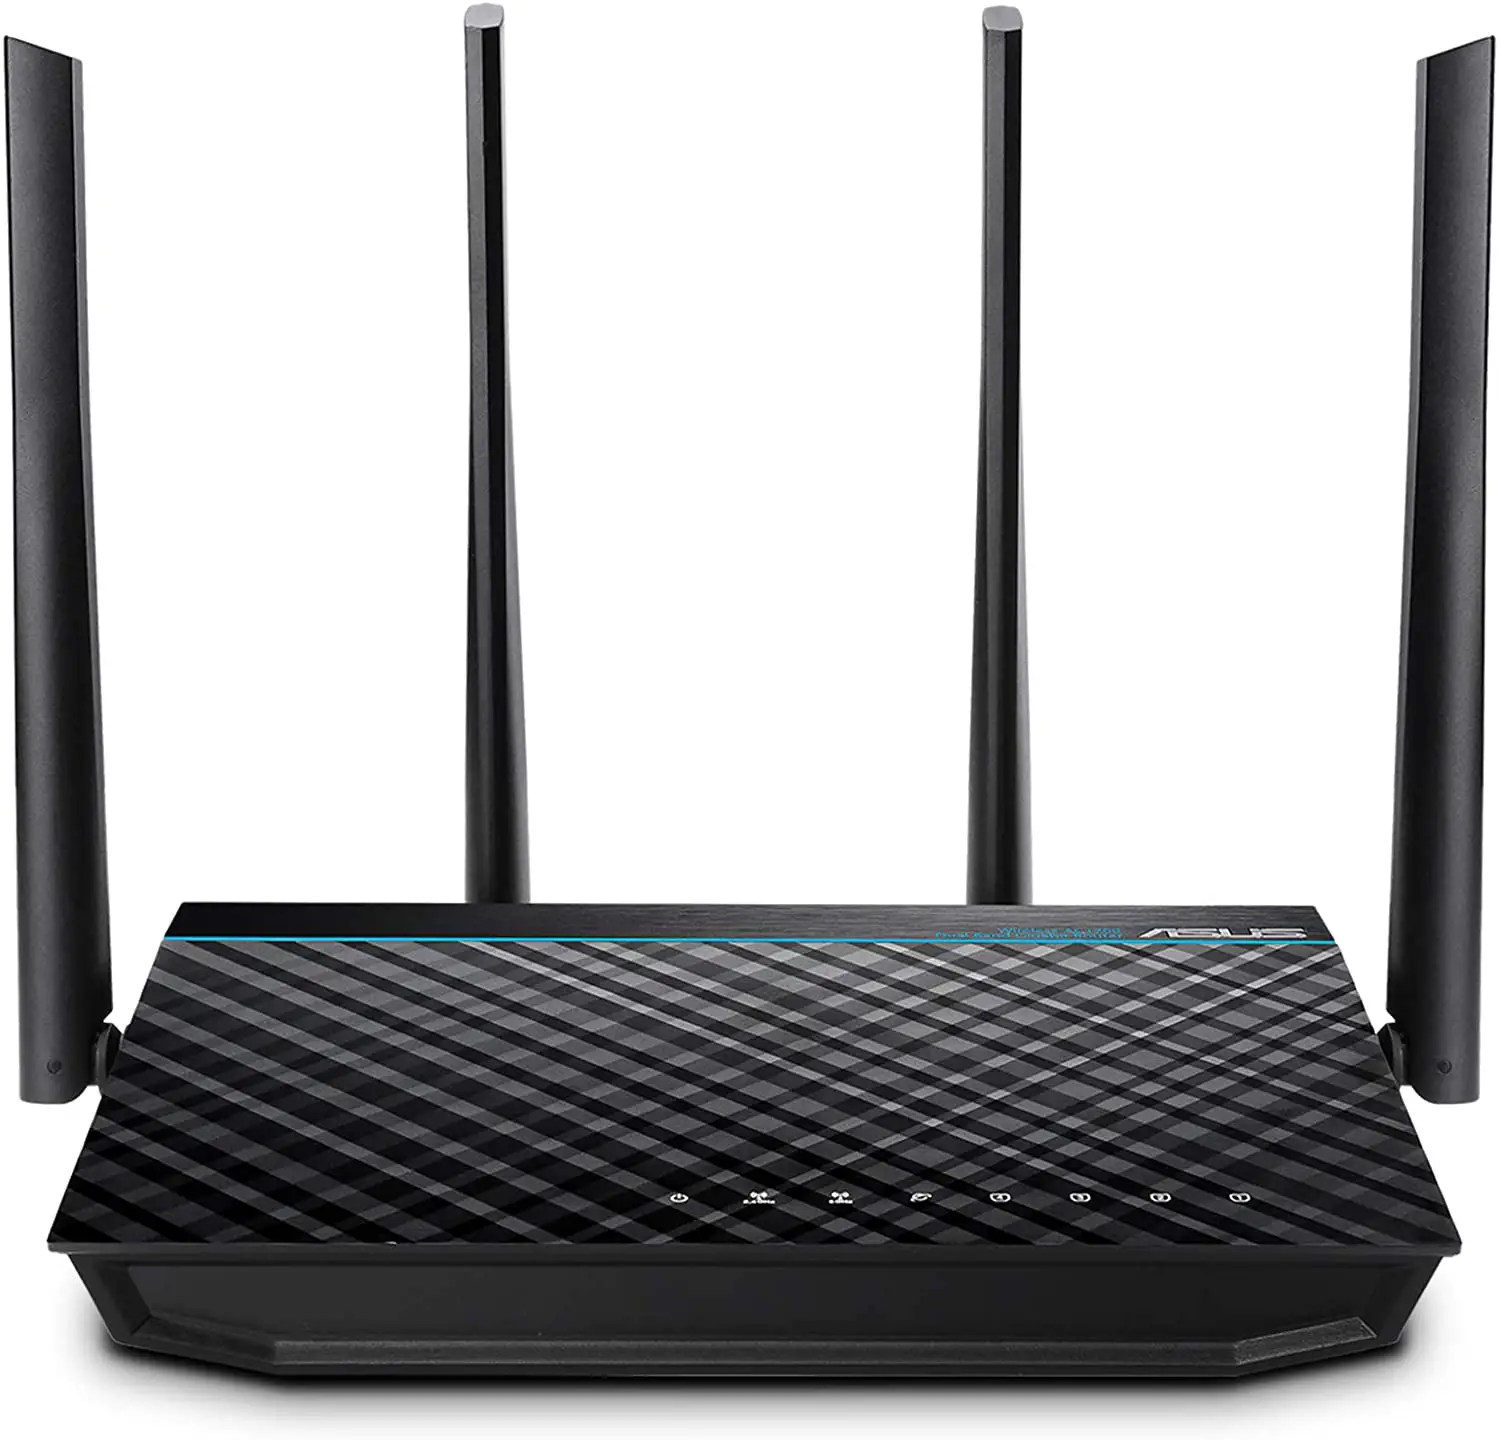 ASUS Wireless-AC1700 Dual-Band Gigabit Router